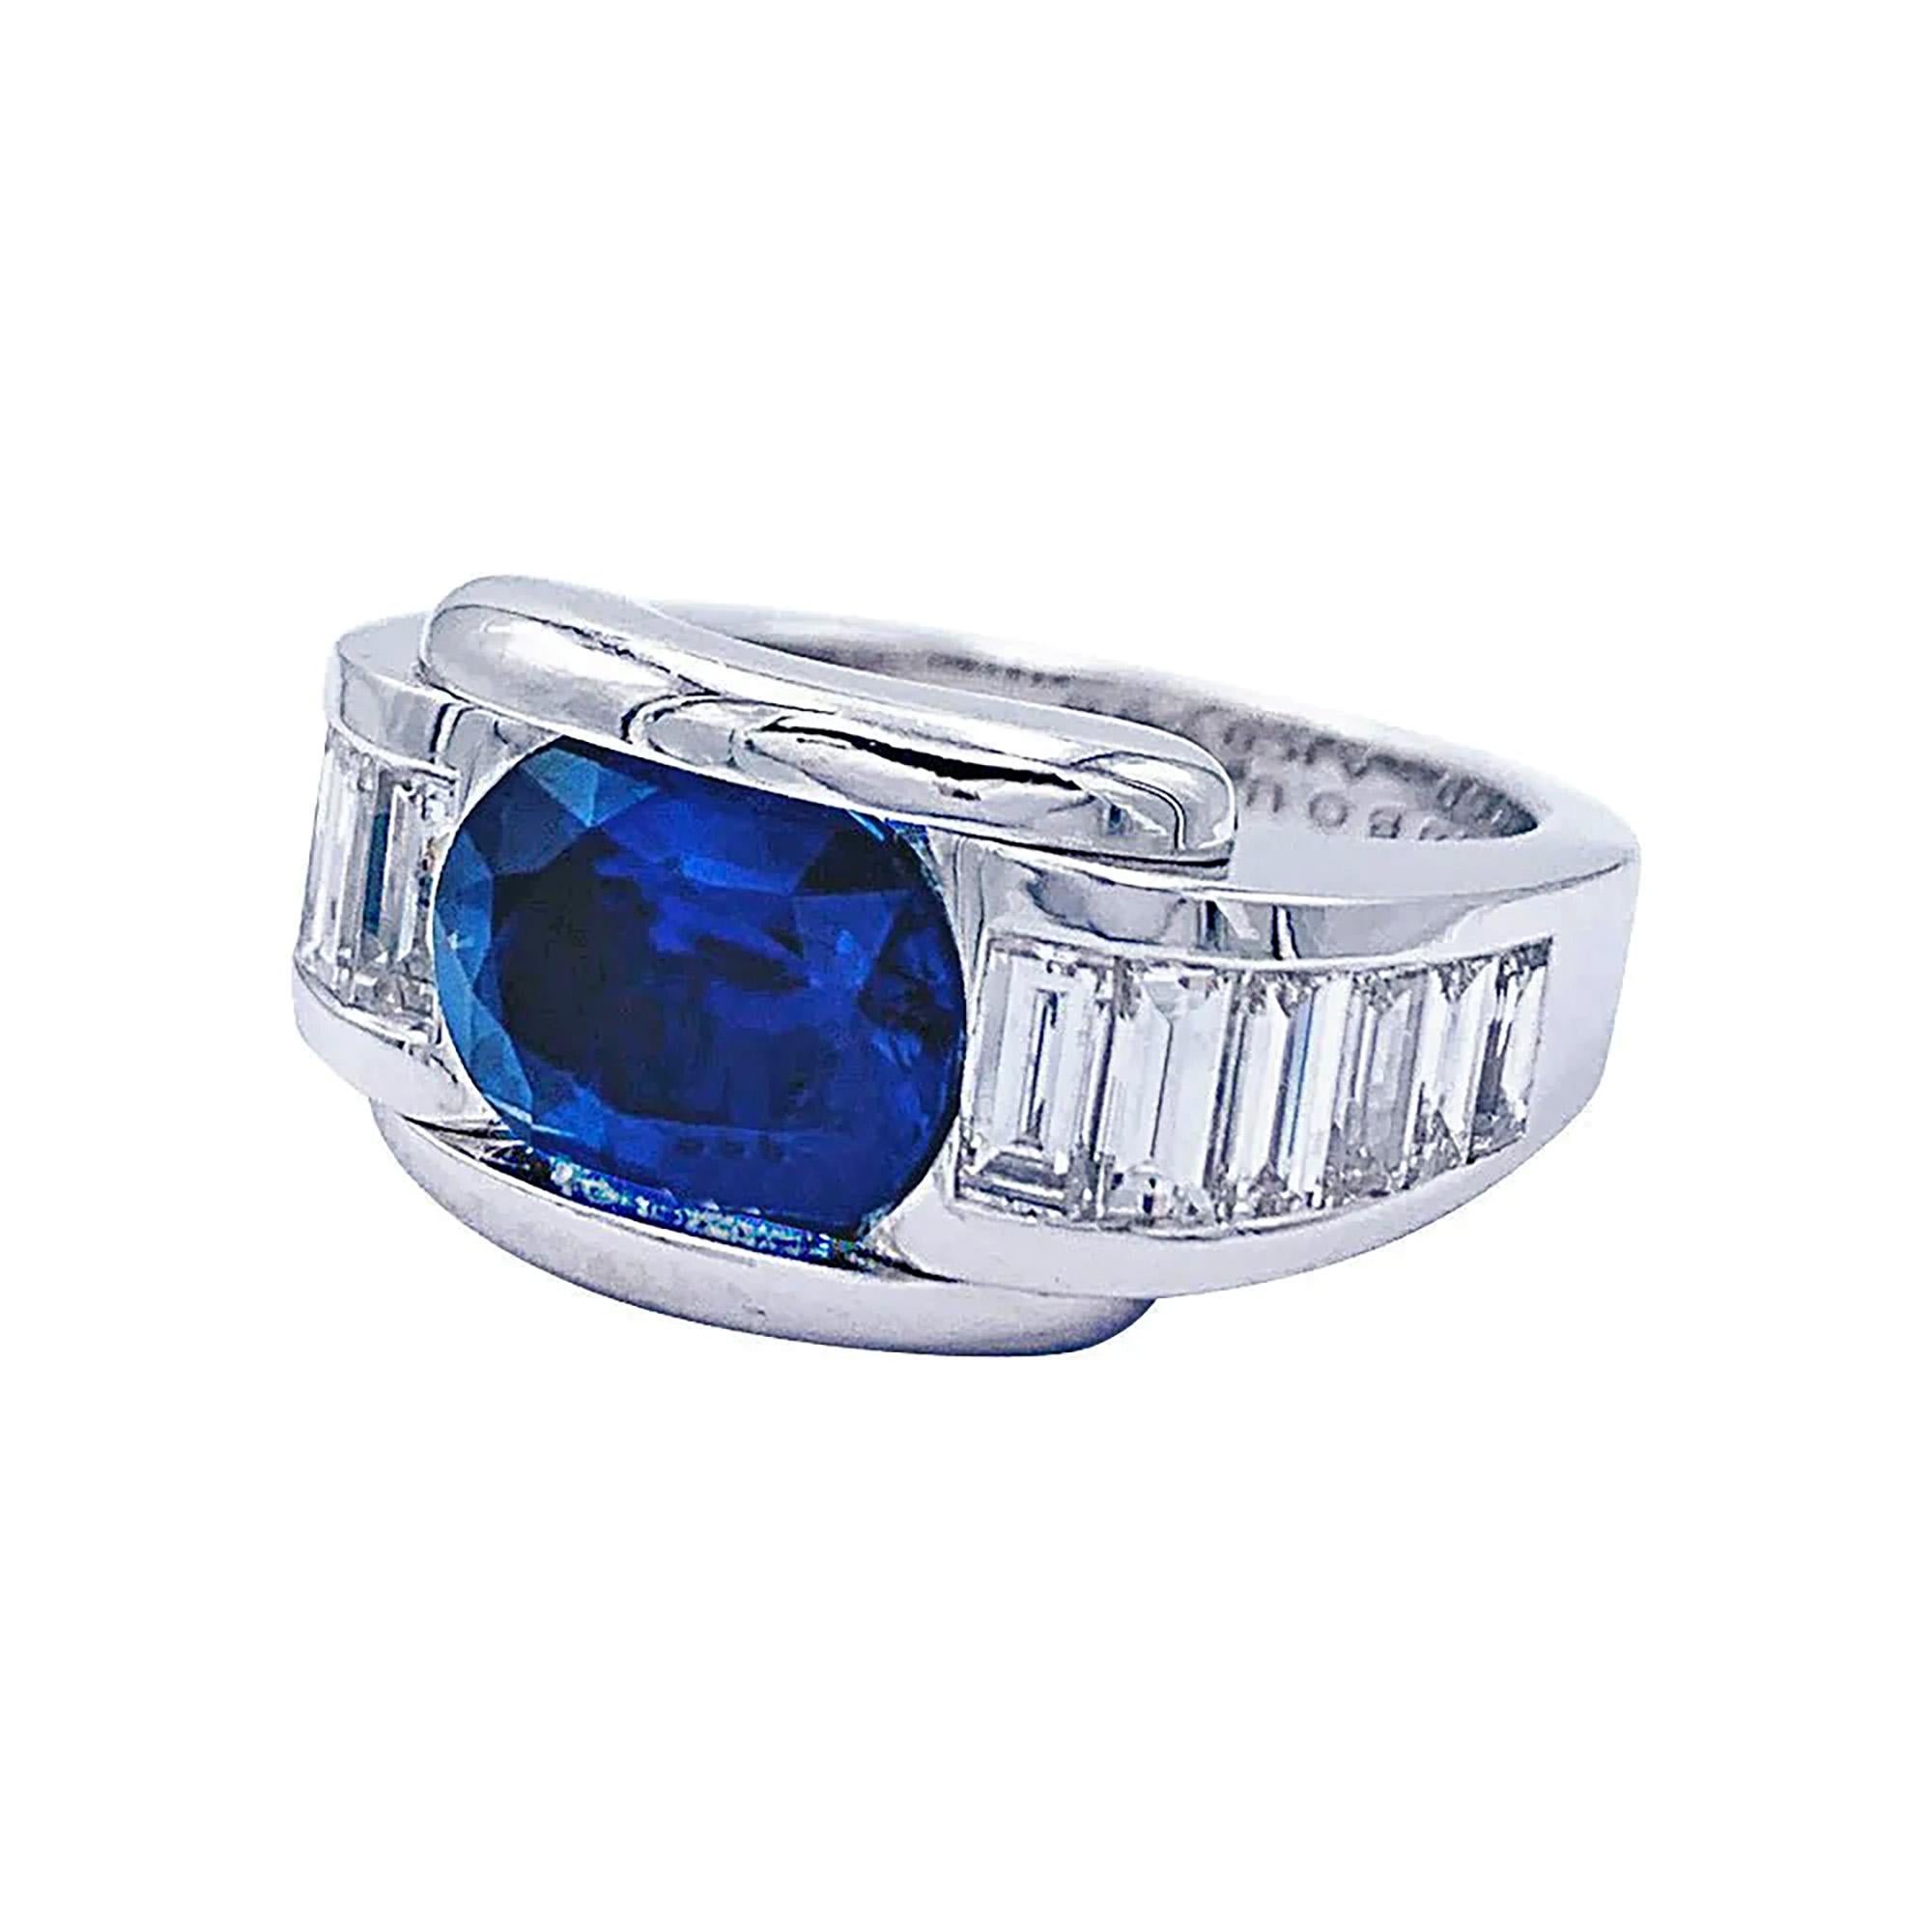 FRENCH SAPPHIRE AND DIAMOND 'ALESSANDRA' DRESS ENGAGEMENT 18K RING, BY MAUBOUSSIN 

A stunning Art Deco design and an exquisite style by famous Maison Mauboussin** -  'ALESSANDRA' ring adorned with Oval-Shaped Sapphire, weighing approx. 3.60cts with